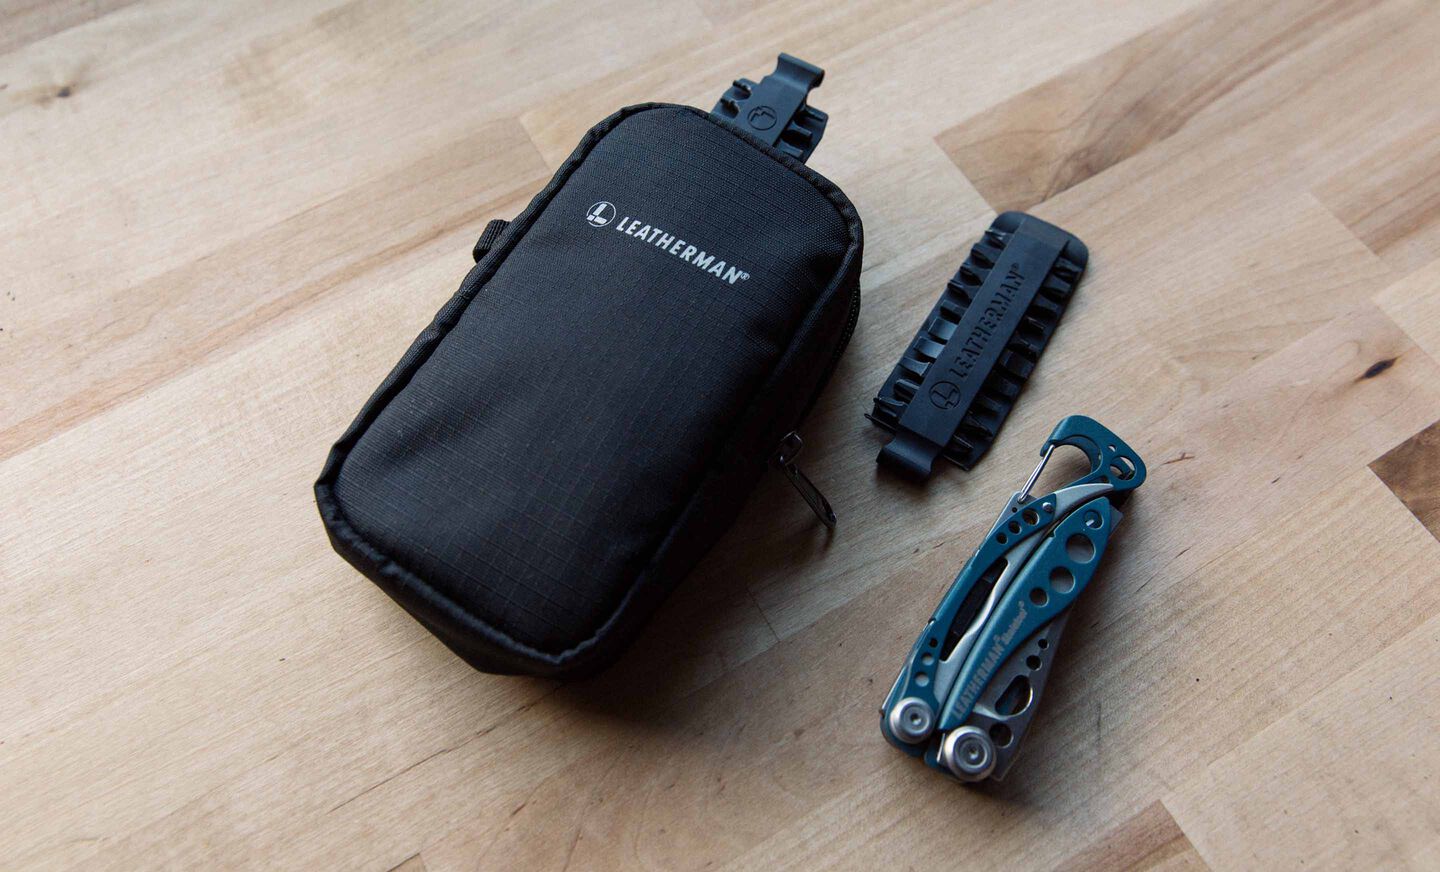 leatherman tool pouch next to Skeletool and Bit Kit